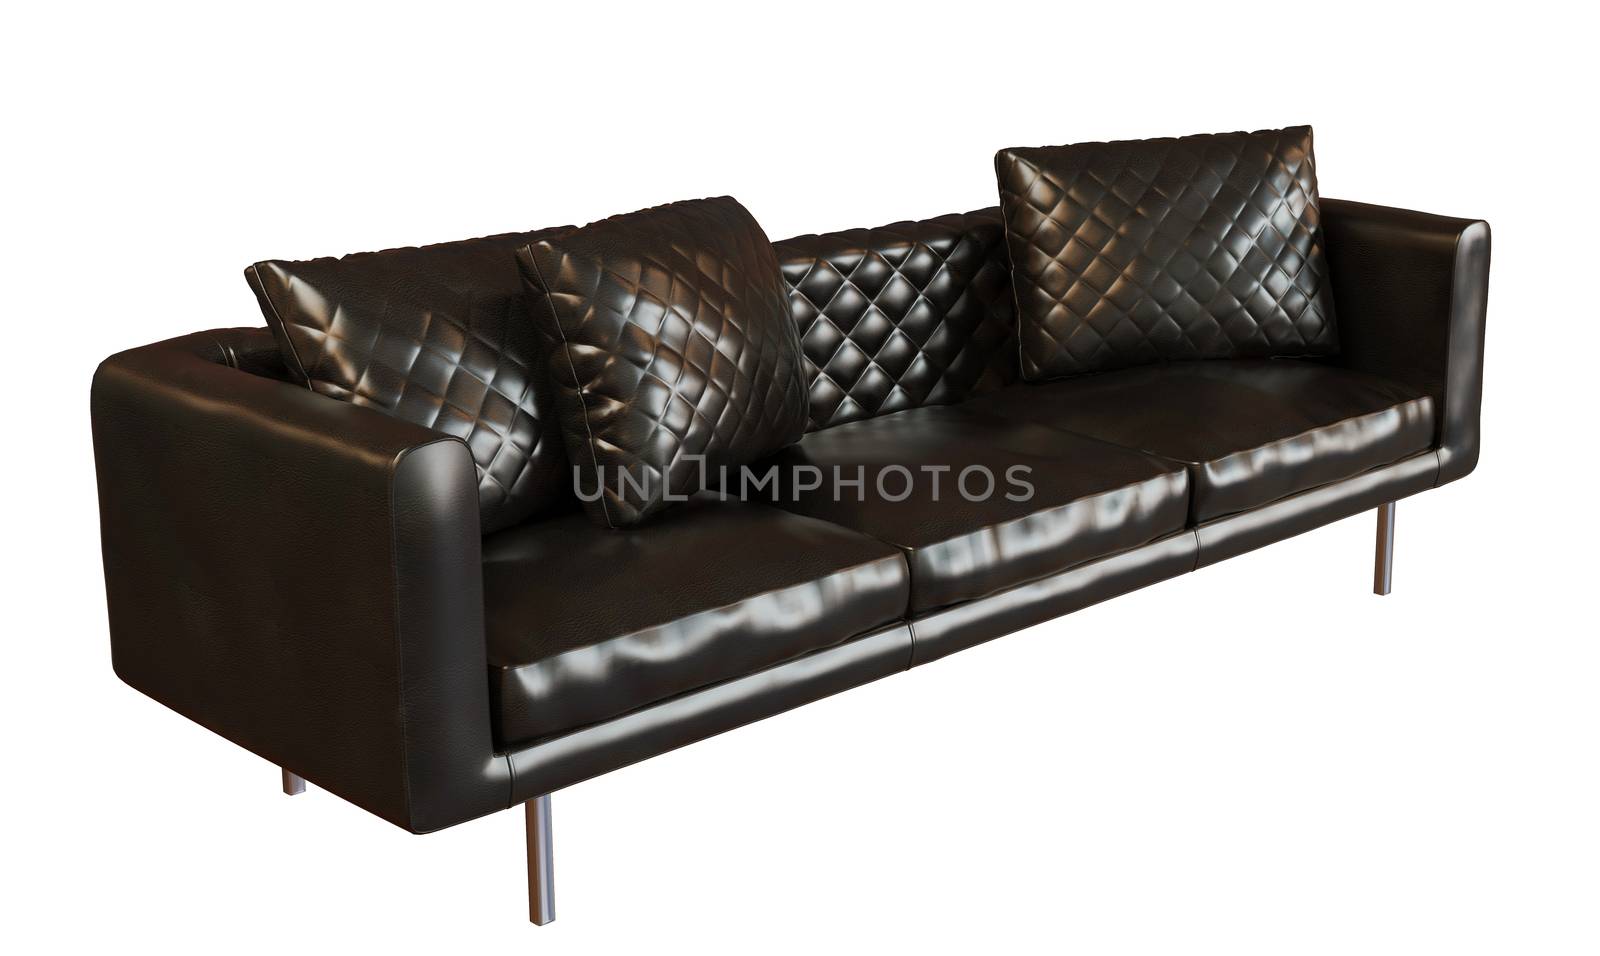 Comfy black leather three place sofa by Morphart